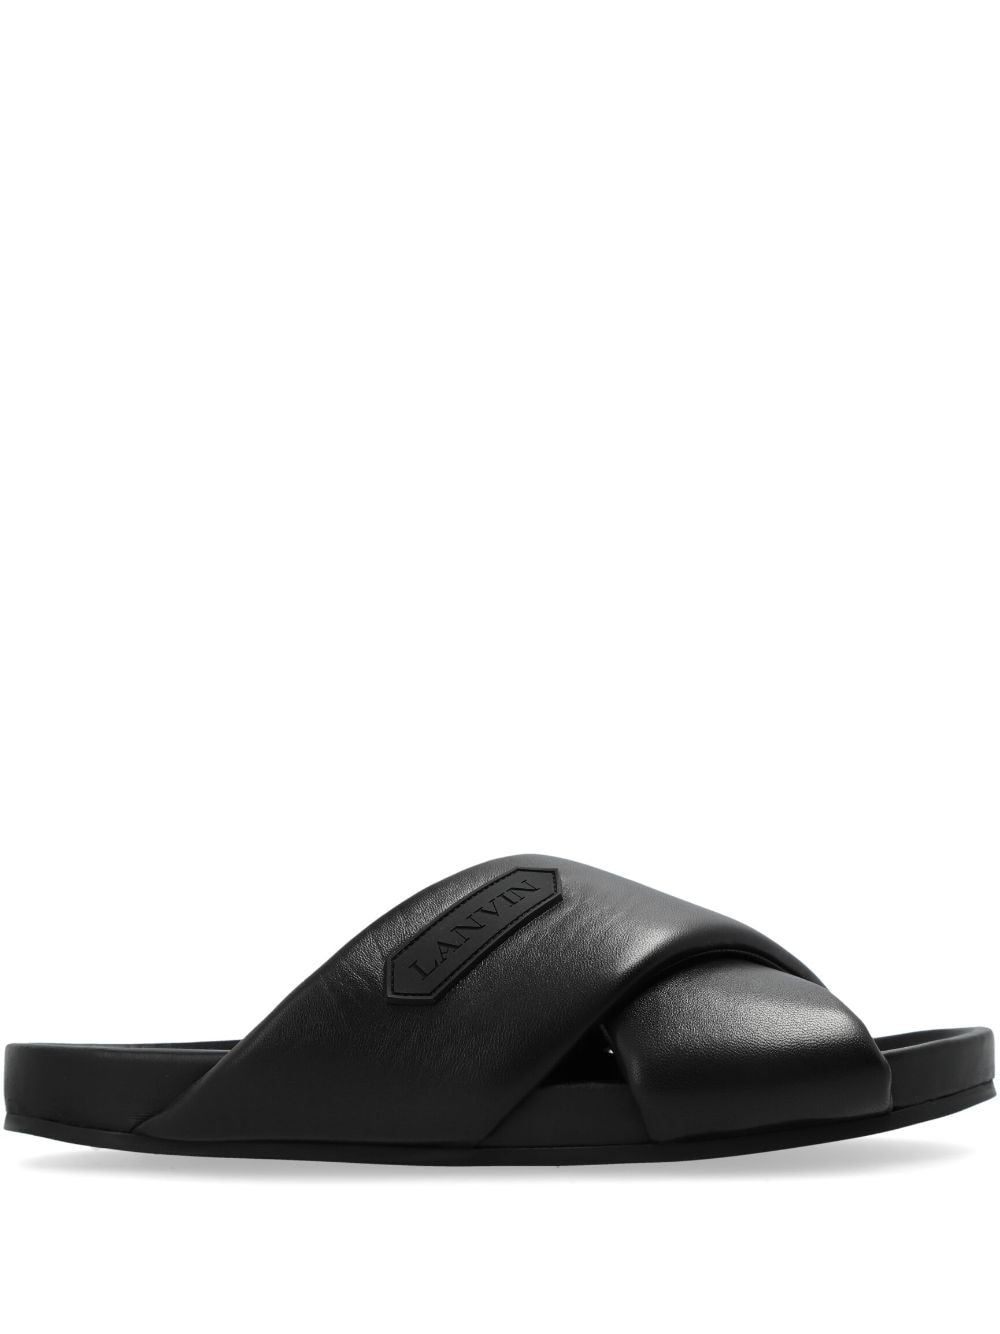 Image 1 of Lanvin Tinkle leather sandals